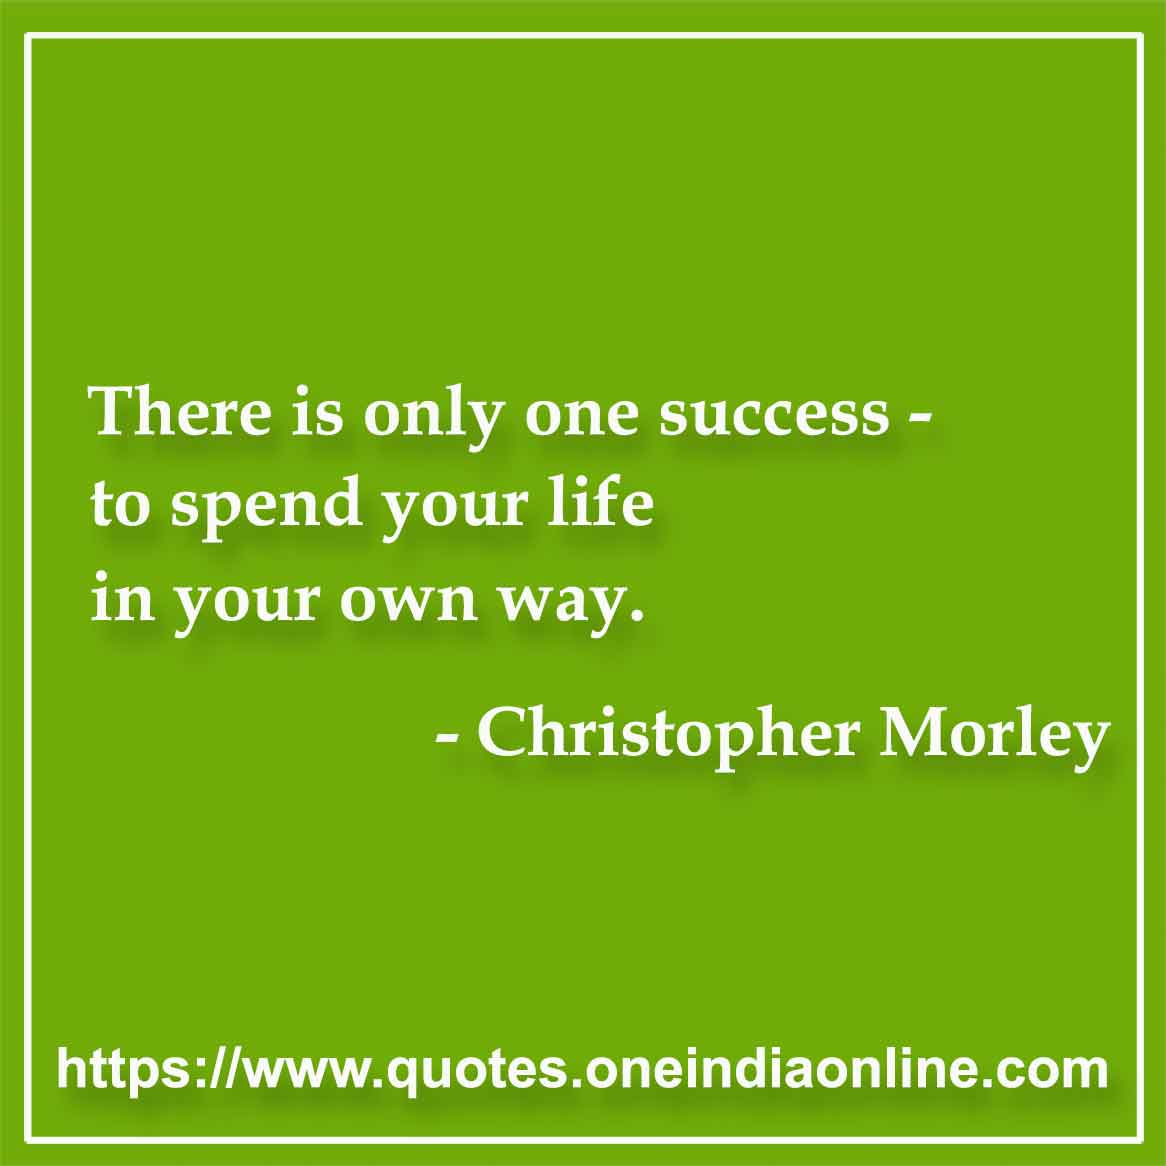 There is only one success - to spend your life in your own way.

-  by Christopher Morley